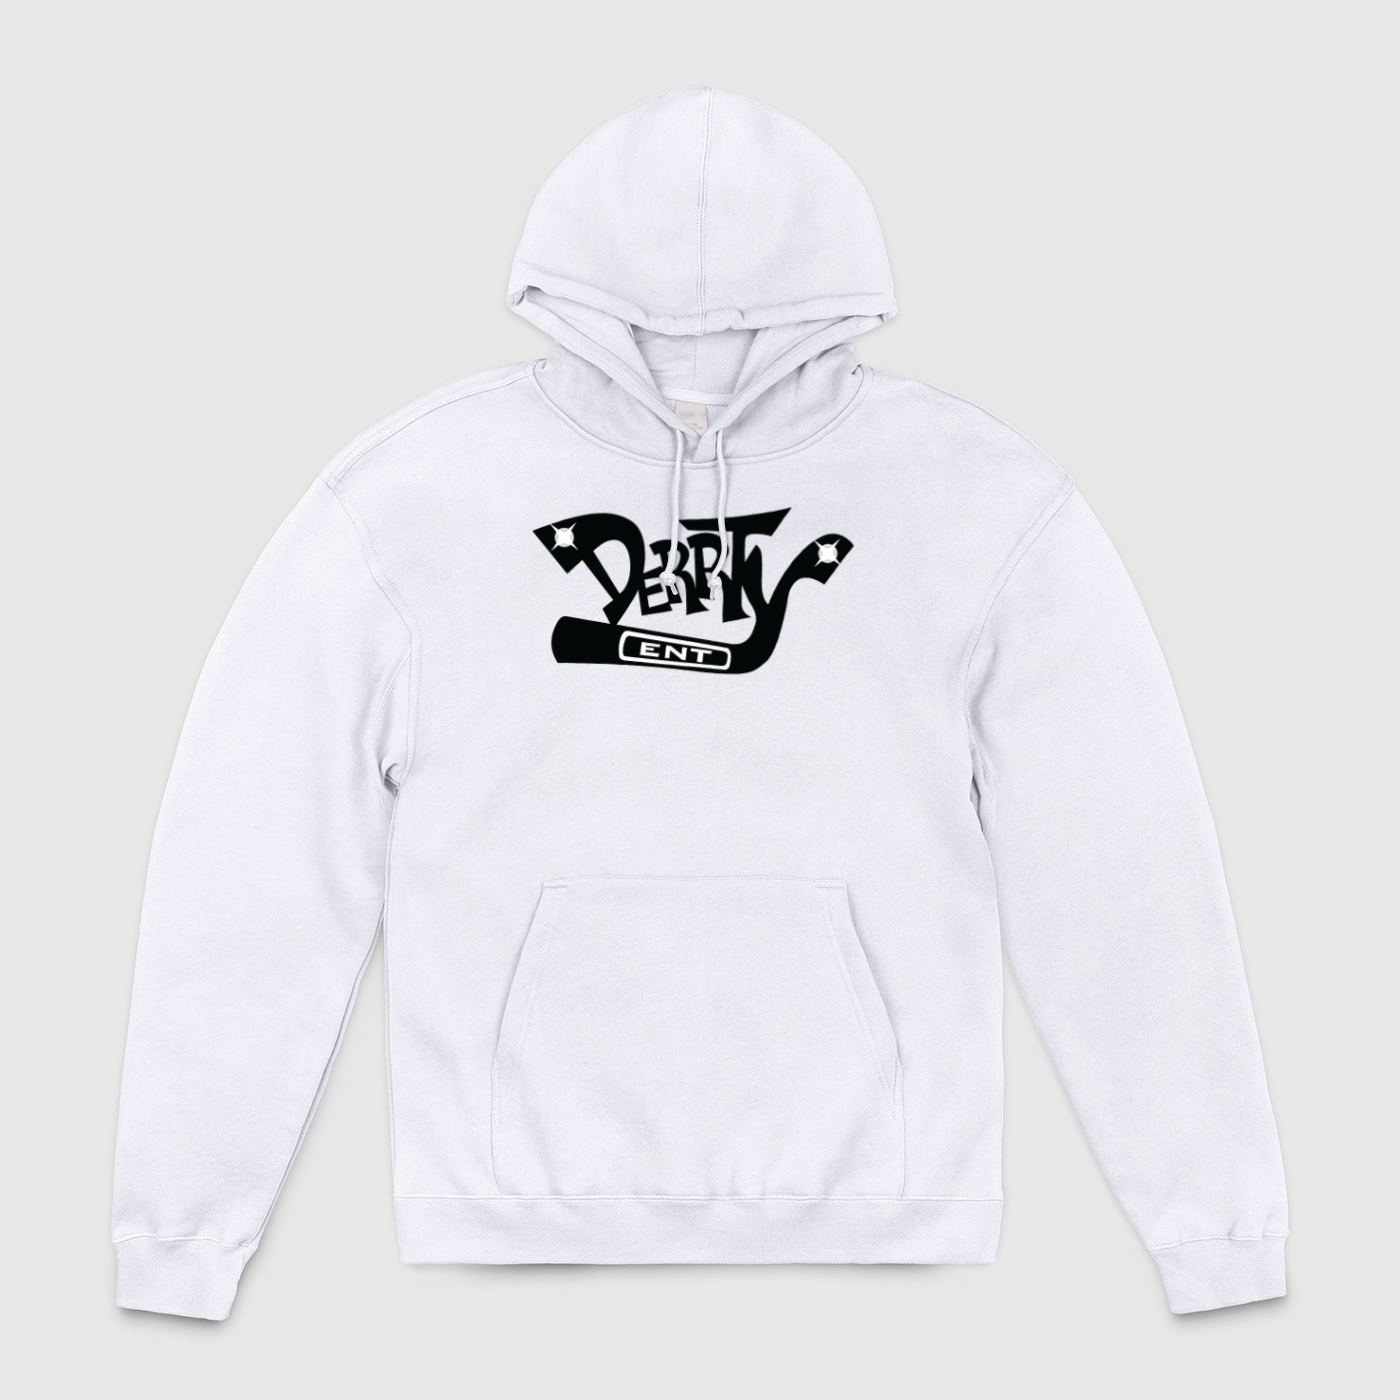 Derrty Ent Classic Logo Unisex Pullover Hoodie